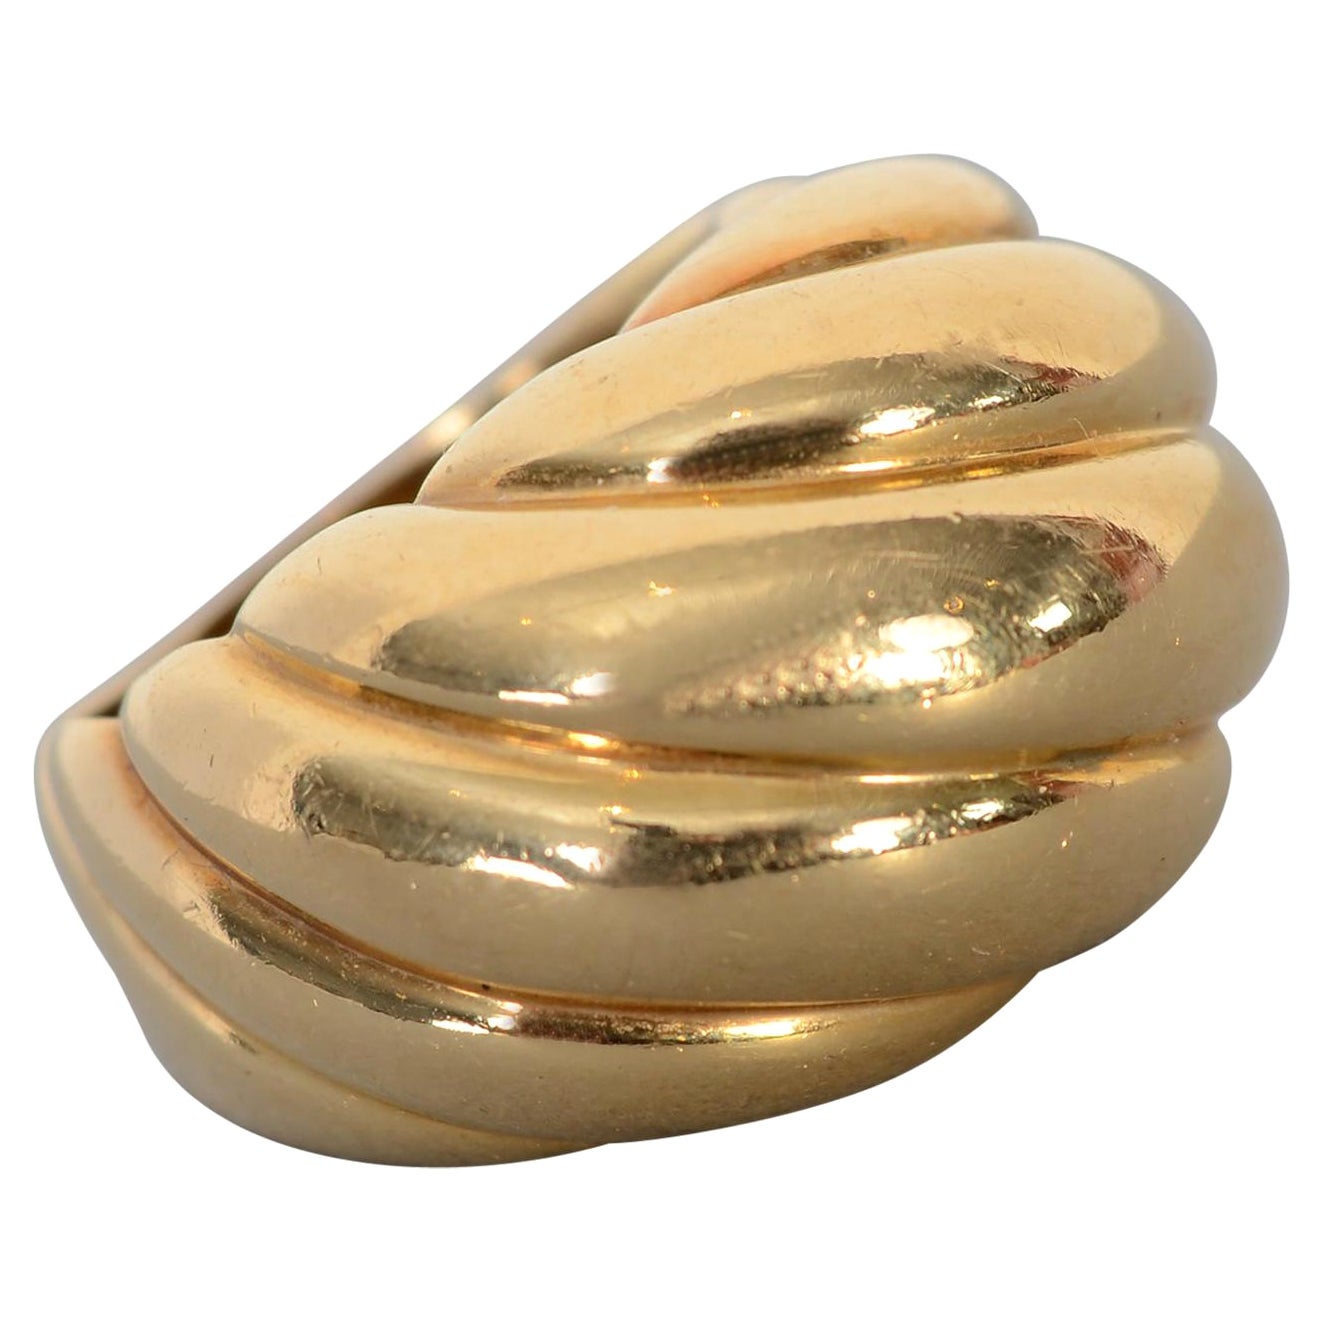 Tiffany & Co. Gold Domed Swirl Ring